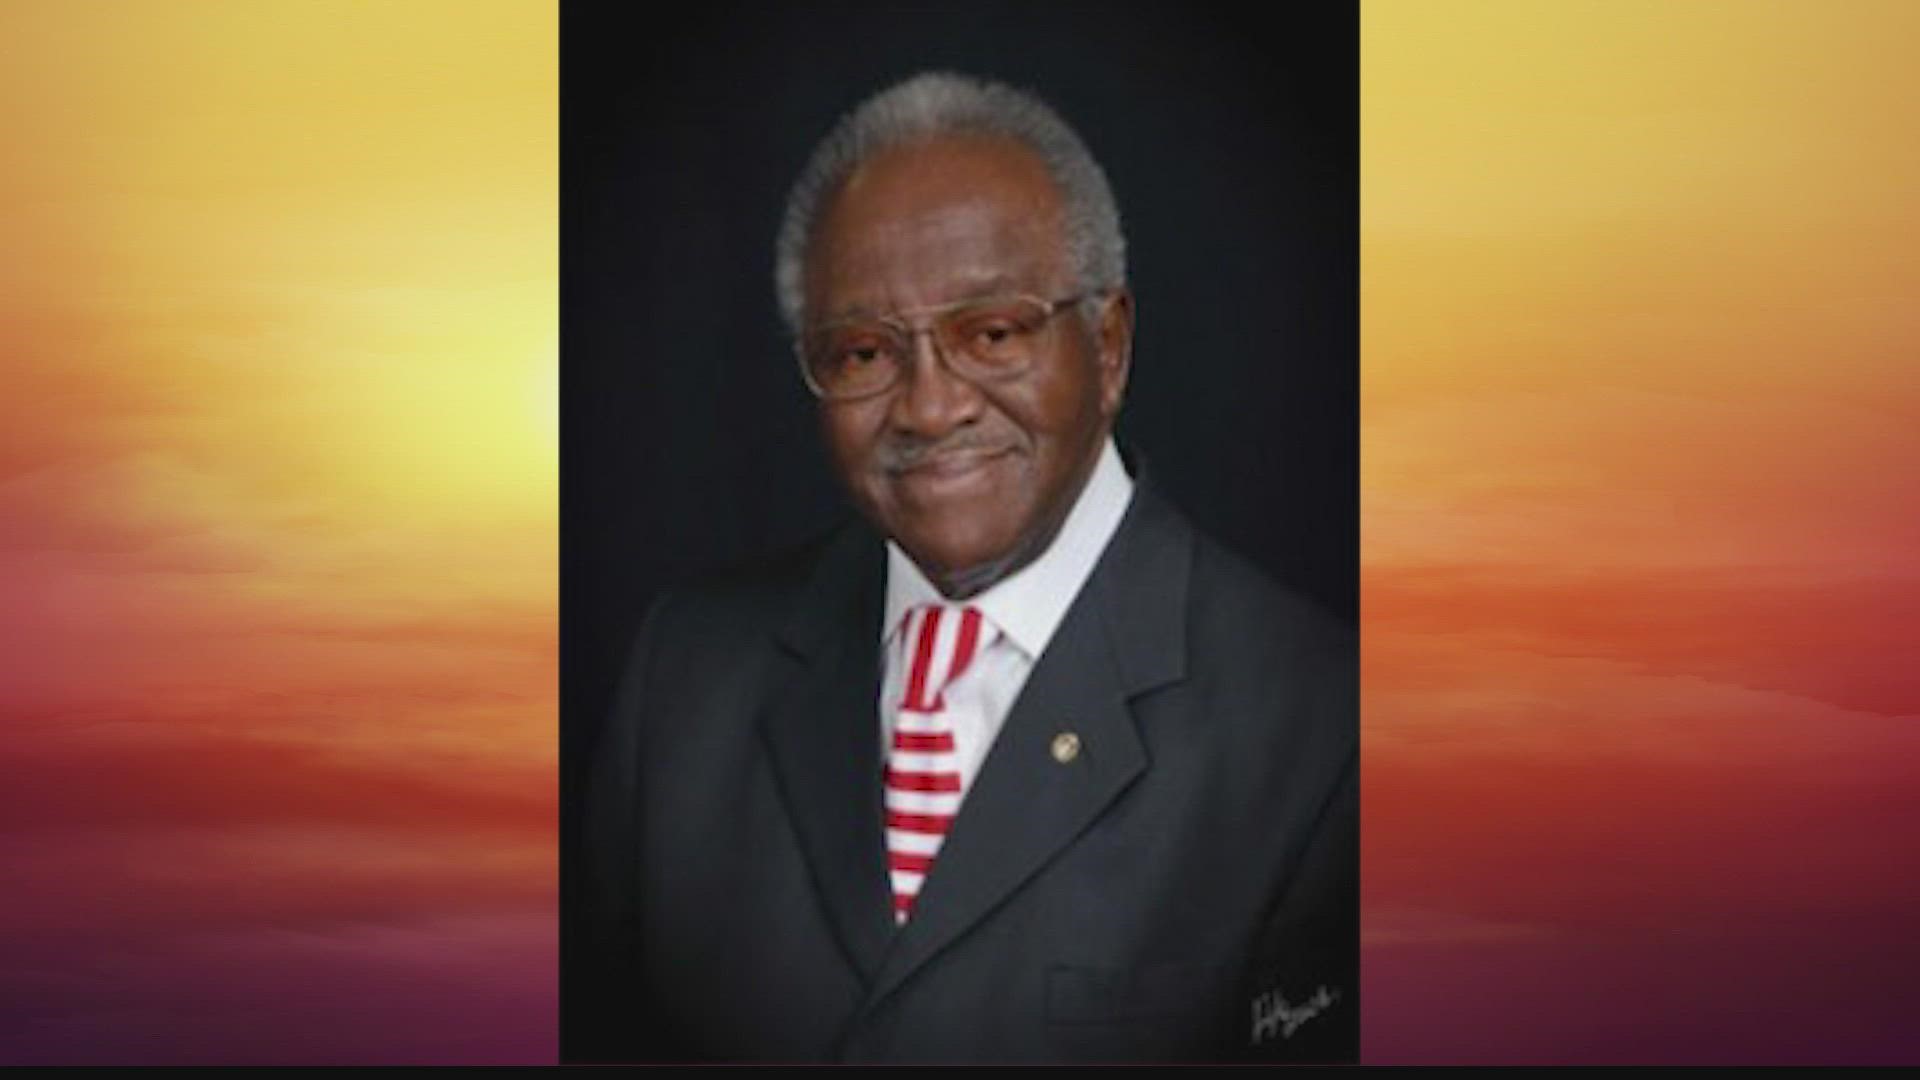 Dr. Richard Showers, Sr. left a legacy of service to his community.